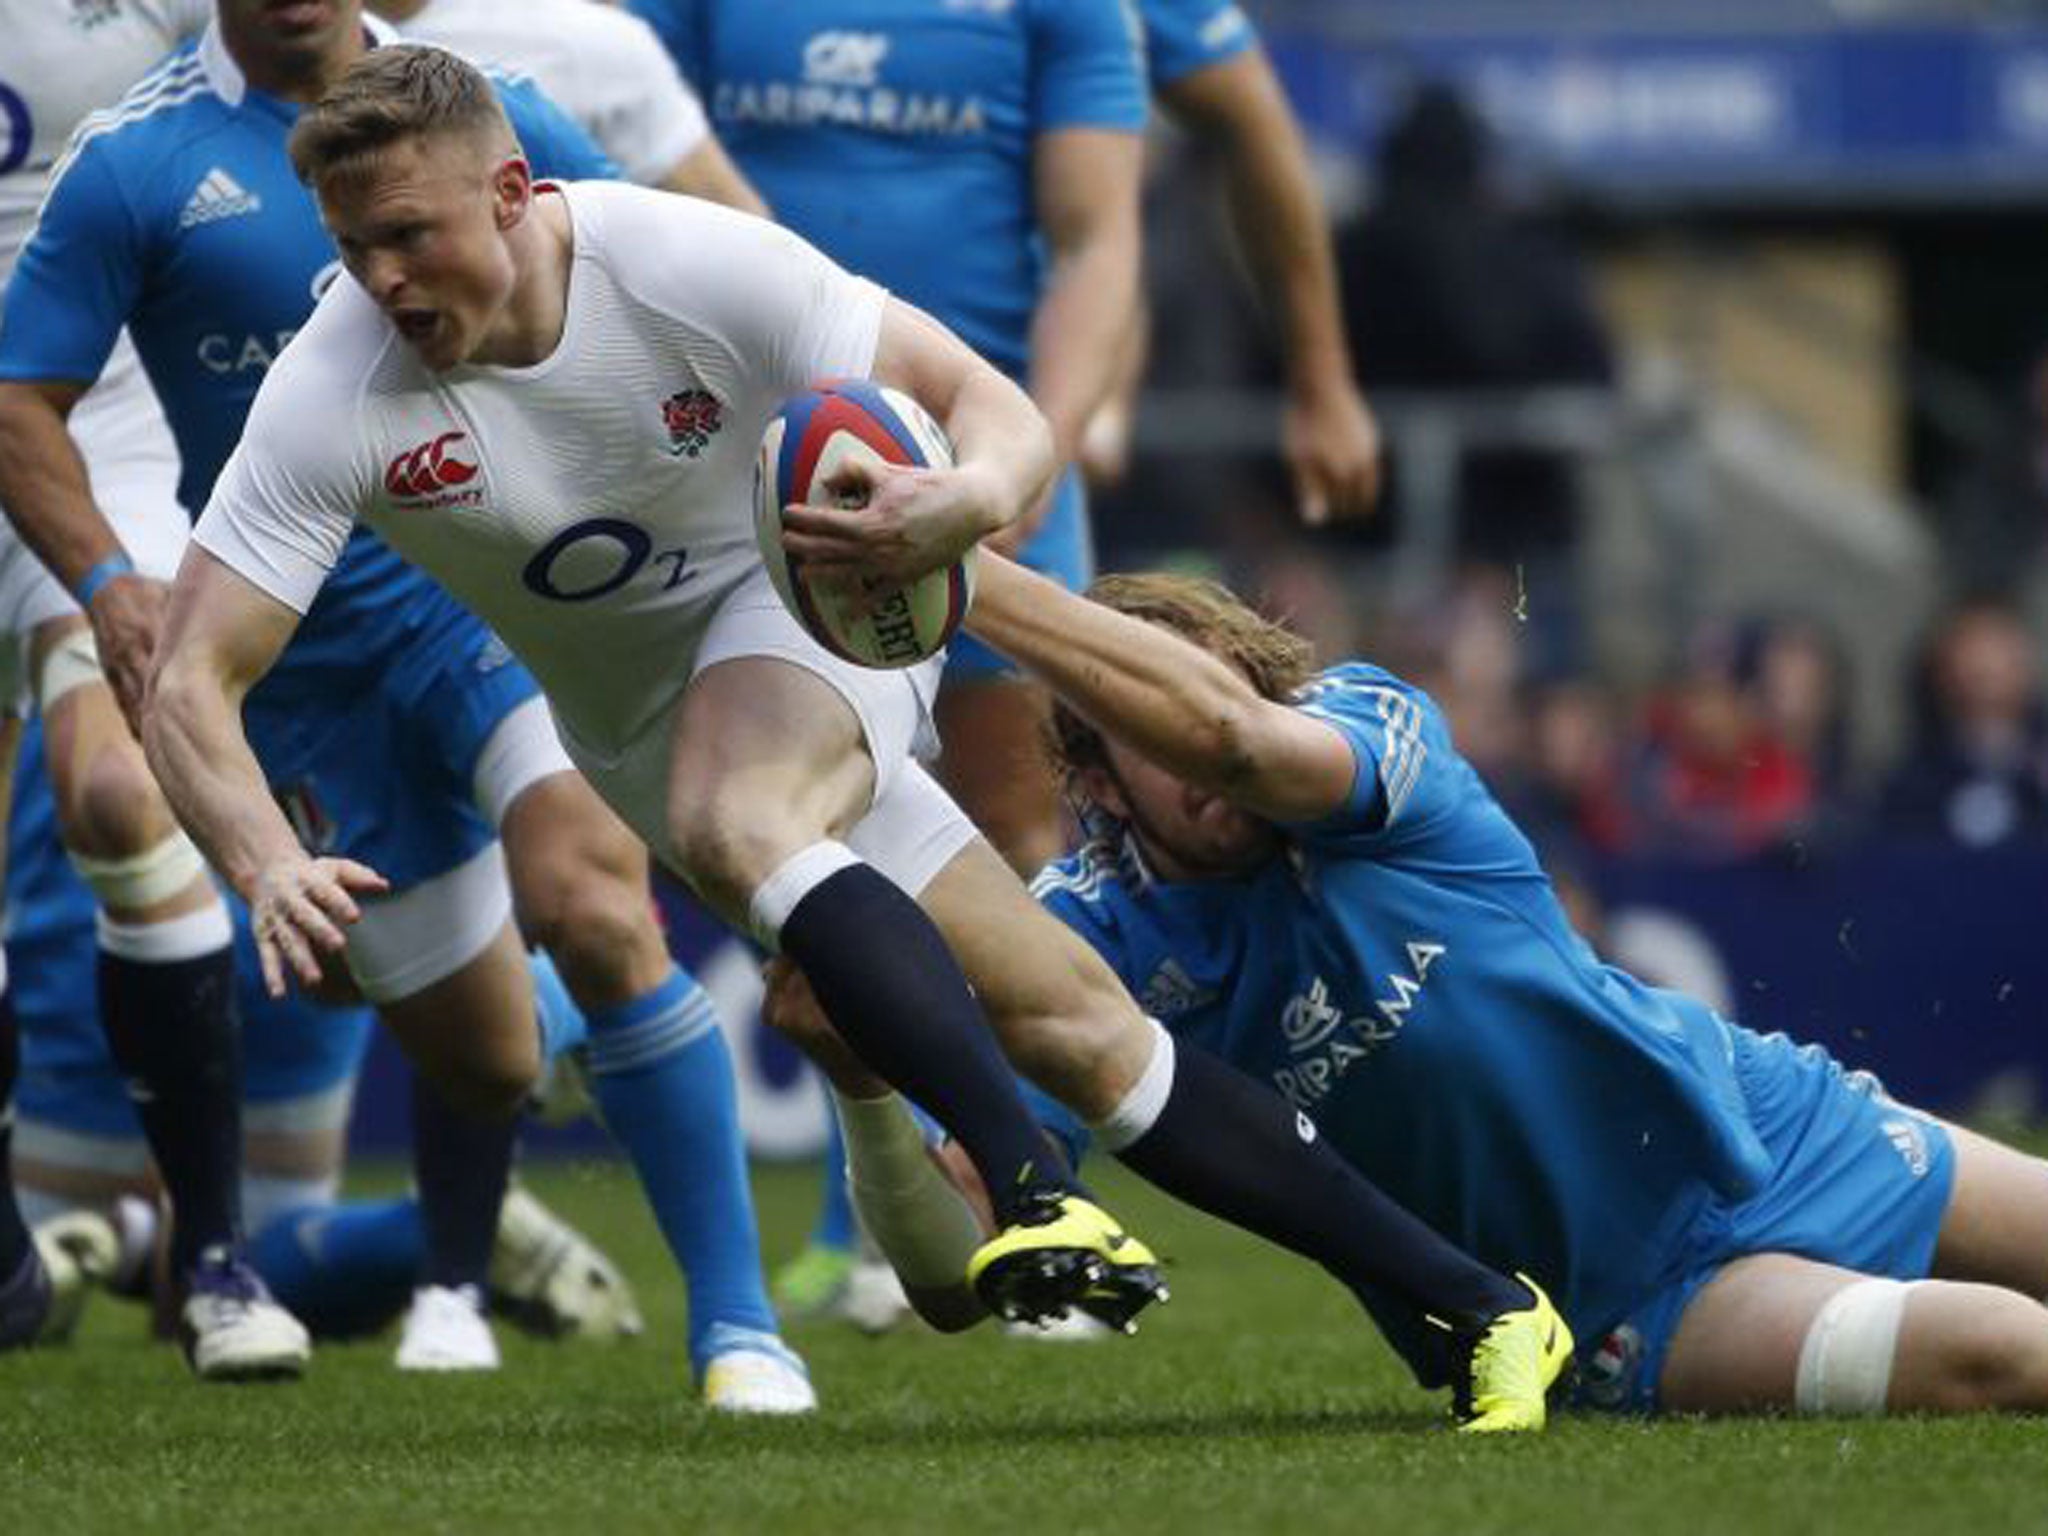 England winger Chris Ashton has yet to score a try in this year’s Six Nations